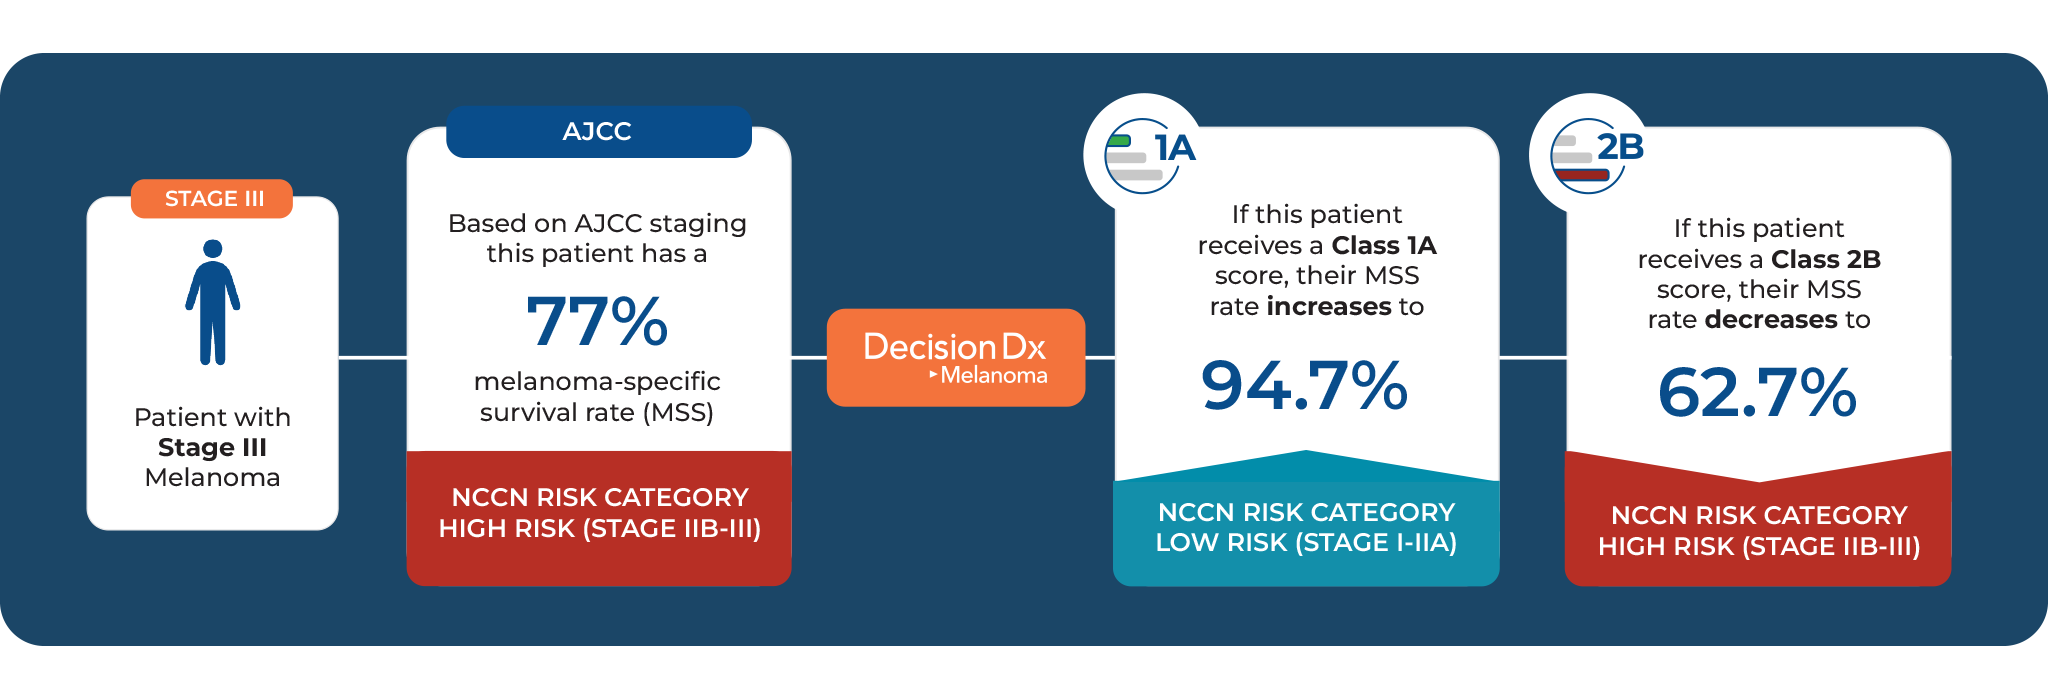 AJCC staging alone suggests a 77% survival rate for Stage III melanoma. Combined with DecisionDx class 1A results, the survival rate is 94.7%. Combine with DecisionDx class 2B results, the survival rate is 62.7%.